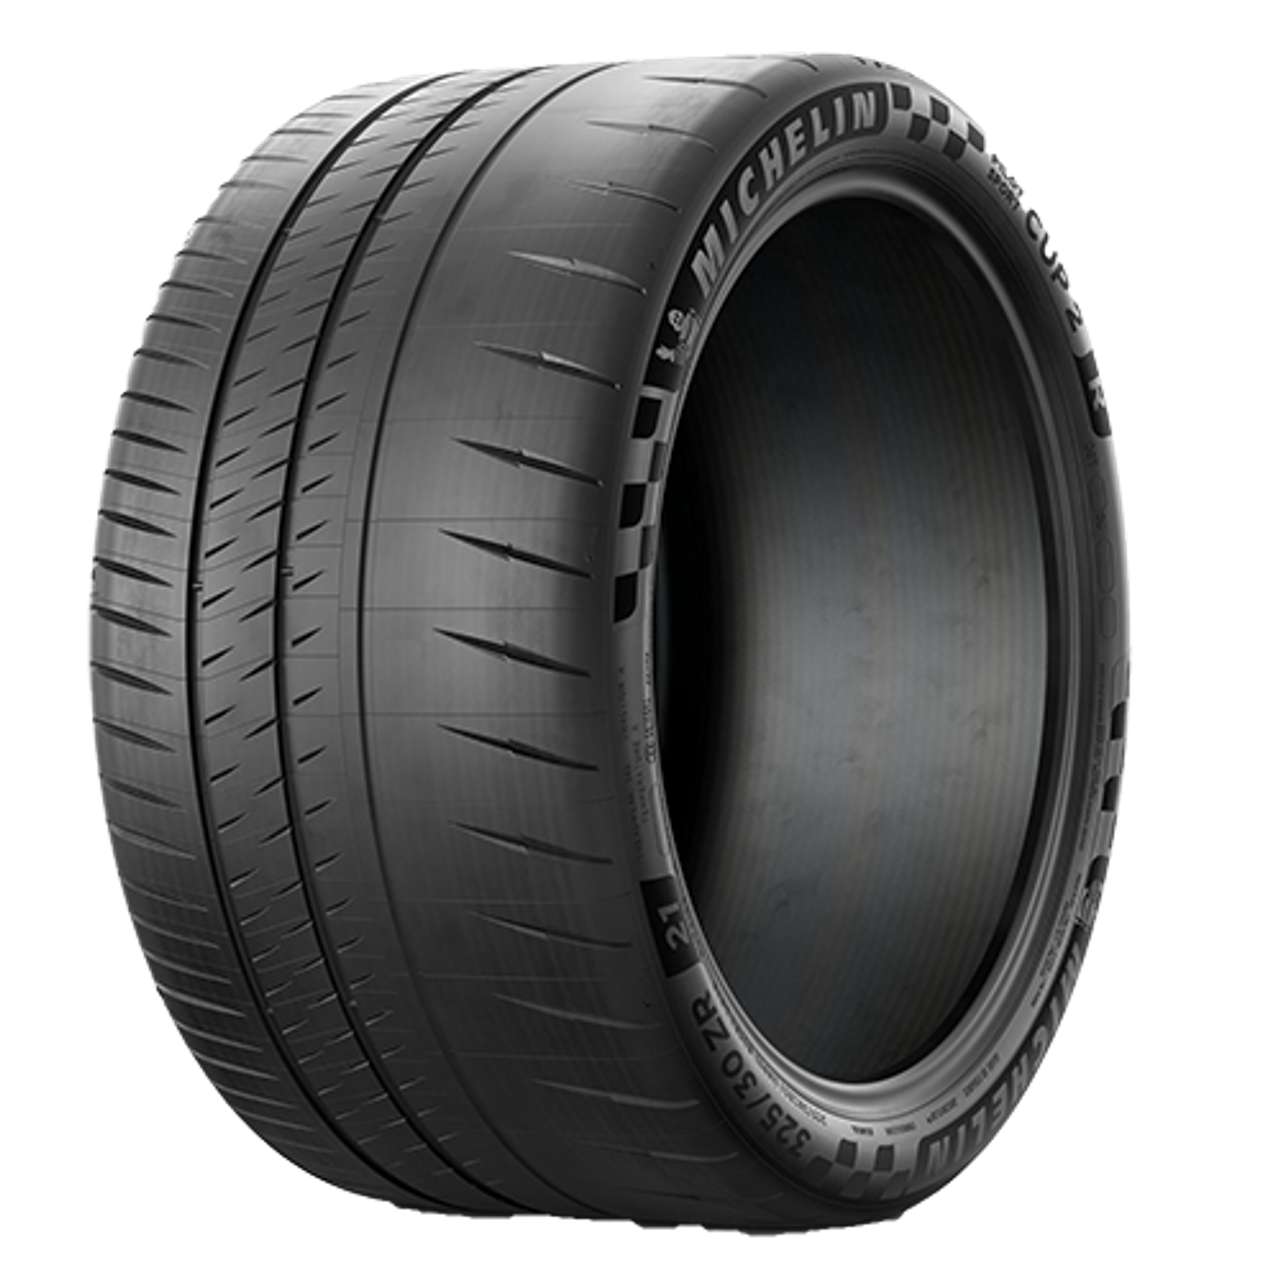 MICHELIN PILOT SPORT CUP 2 R CONNECT 295/30ZR20 101(Y) BSW